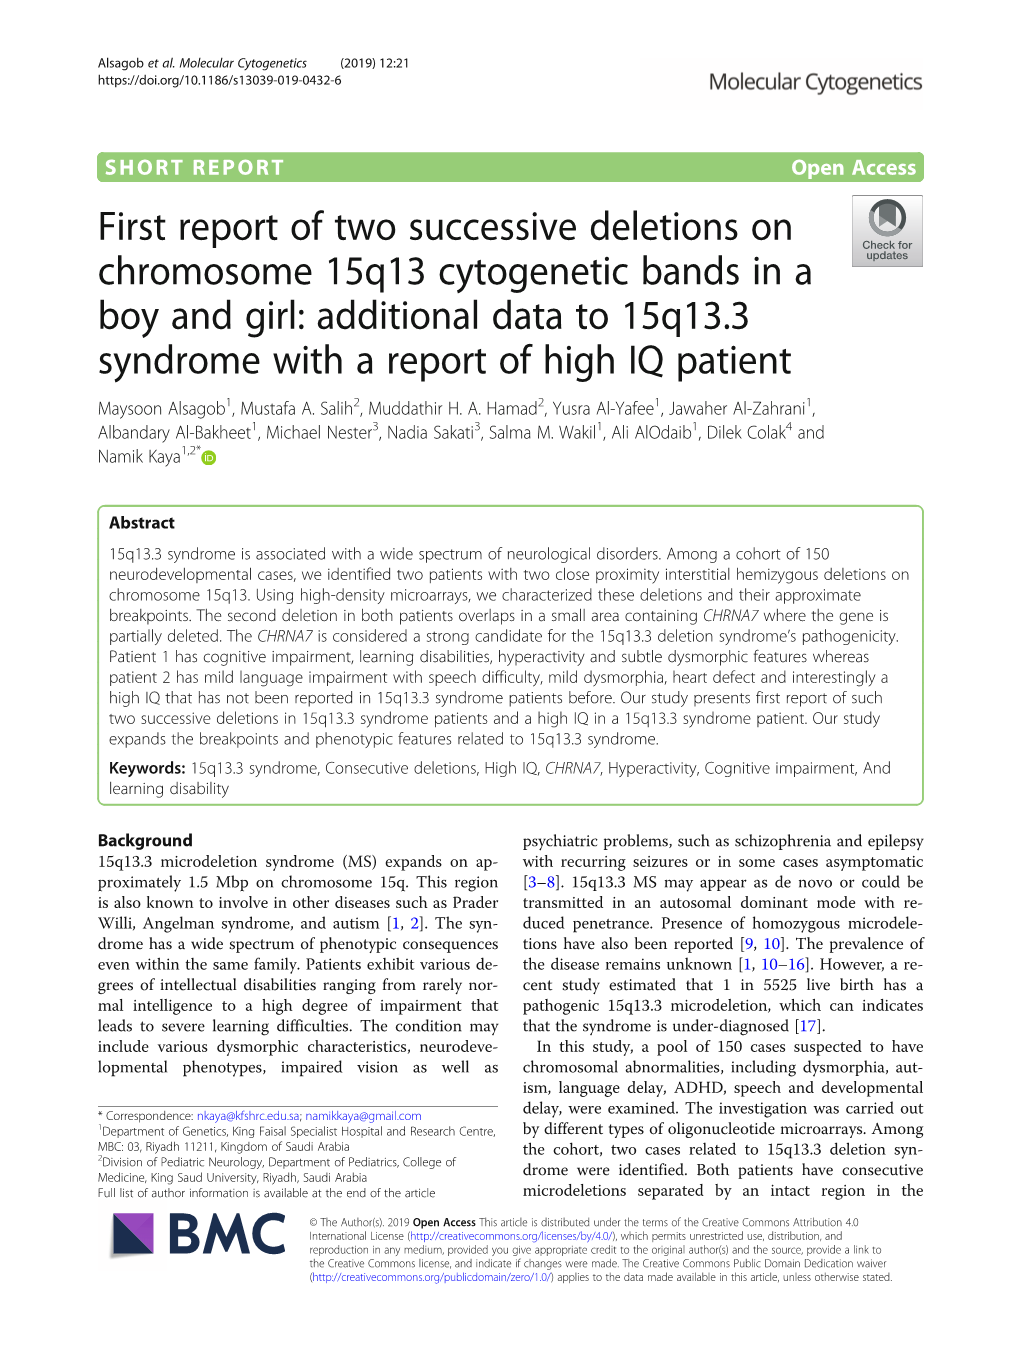 First Report of Two Successive Deletions on Chromosome 15Q13